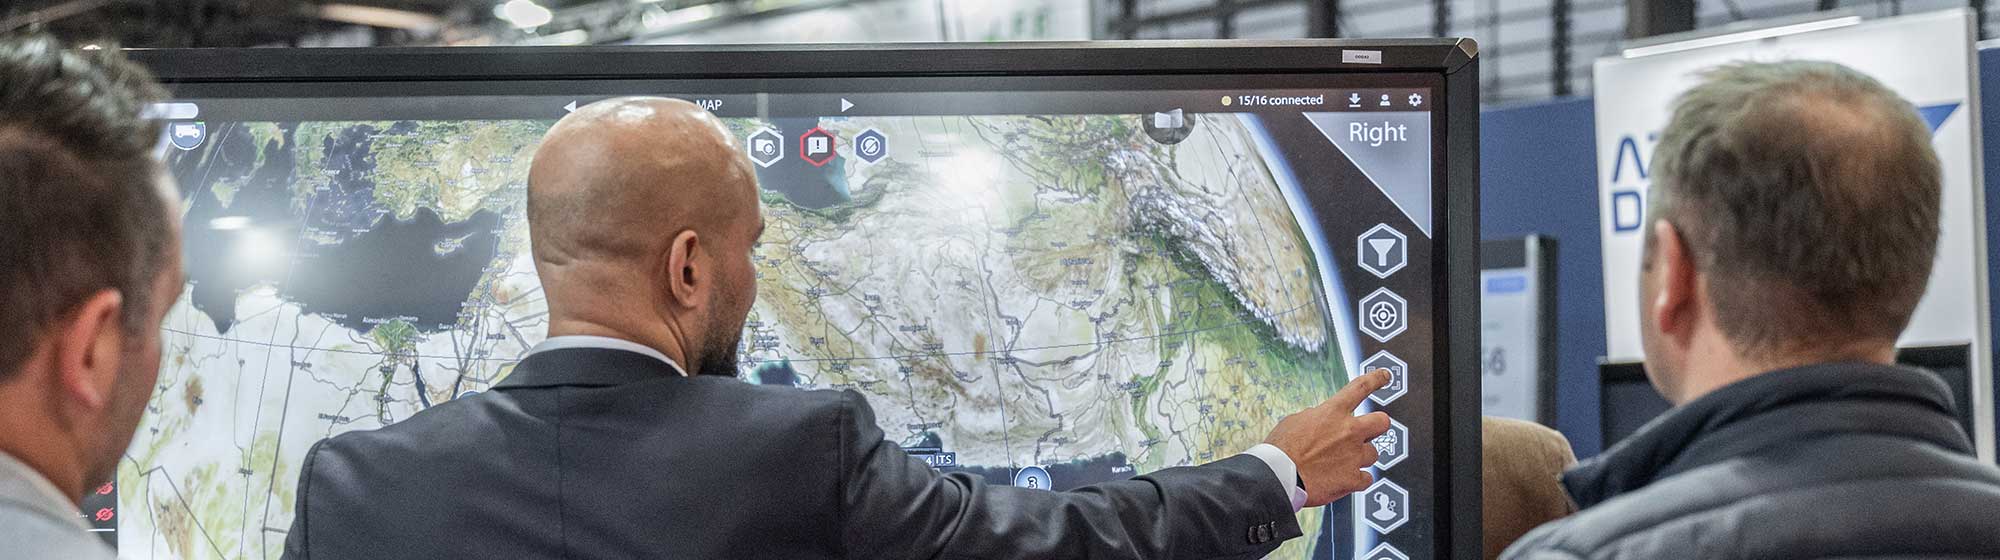 Man pointing at a large interactive screen, engaging with the technology